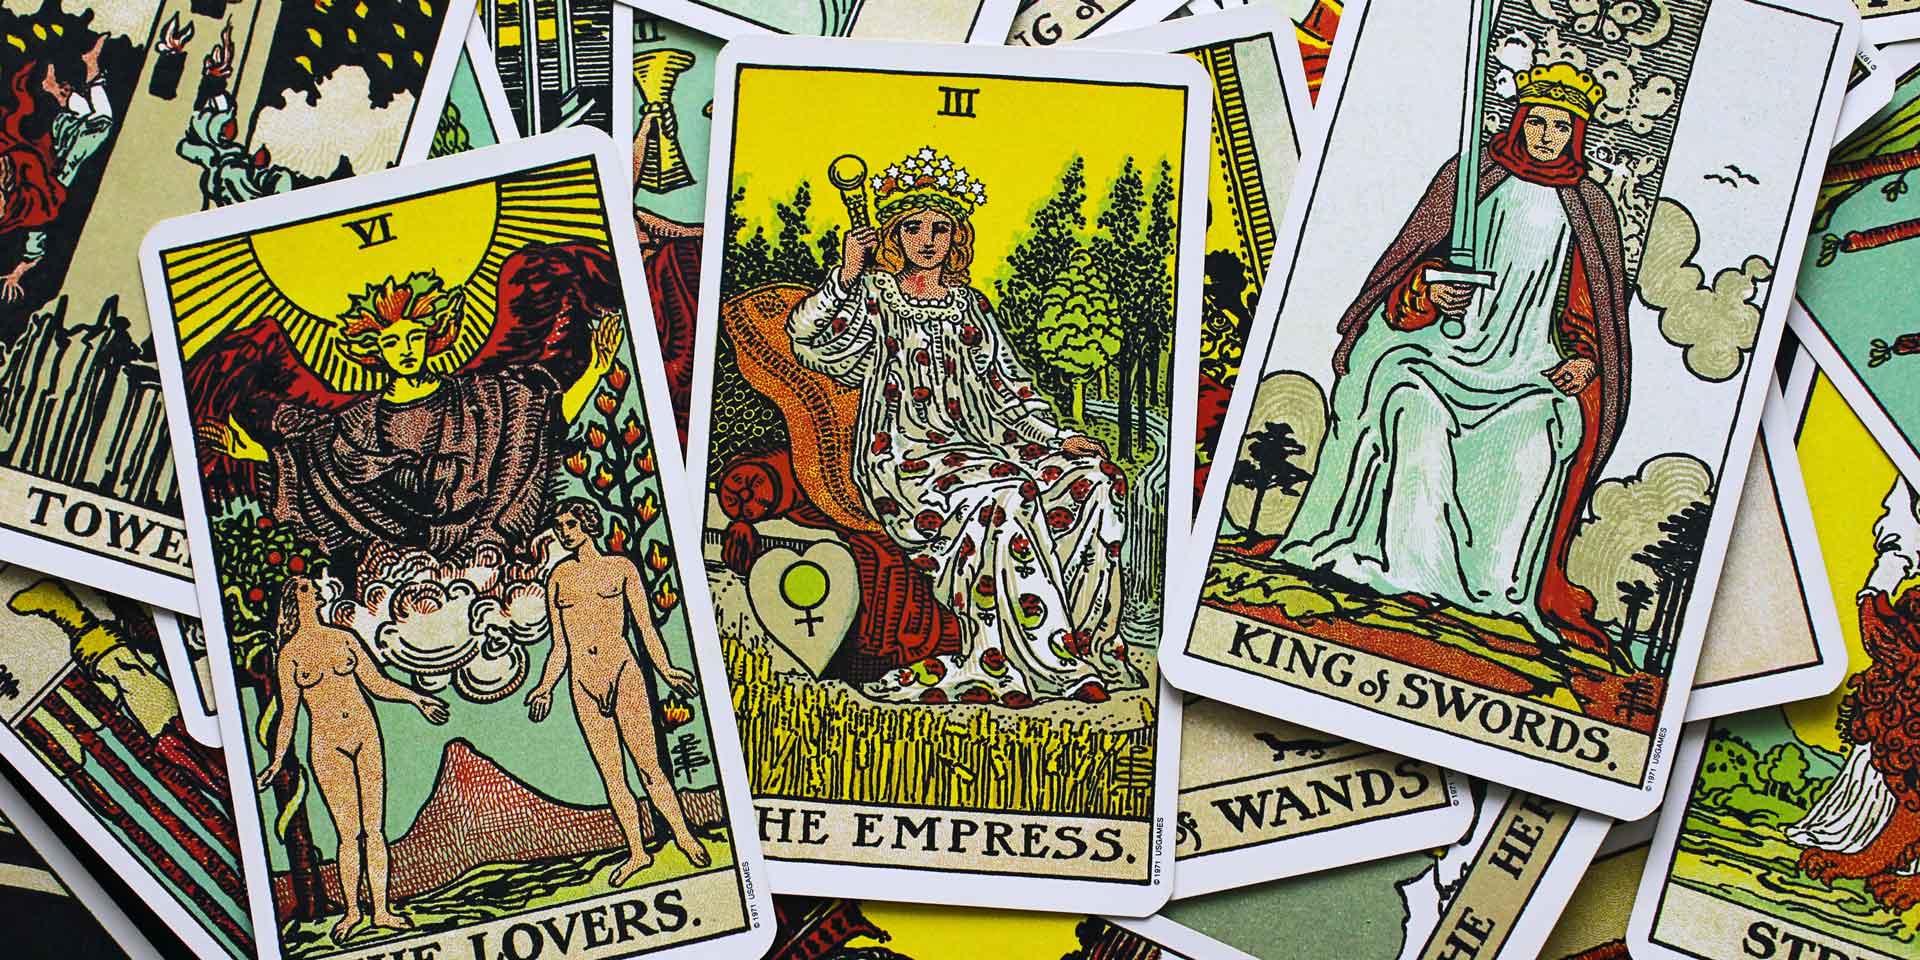 A vibrant collection of tarot cards, a new age product, spread out, with "the empress" card drawing focus amidst various other richly illustrated symbols and figures.